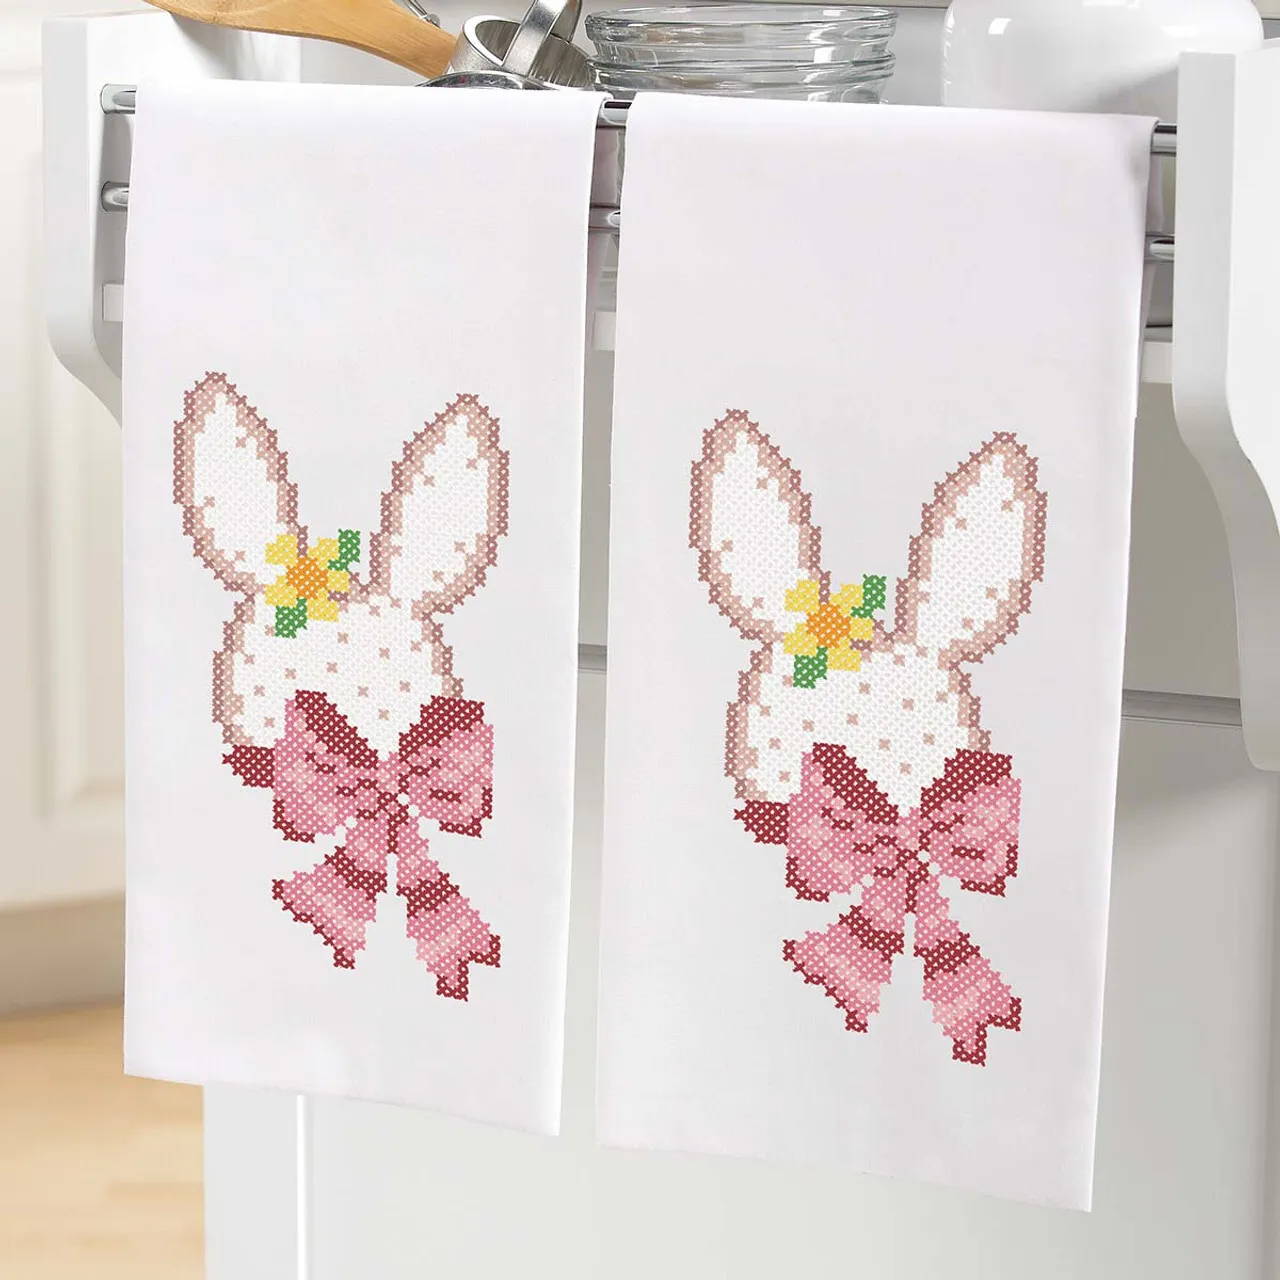 Herrschners Easter Towel Pair Stamped Cross-Stitch